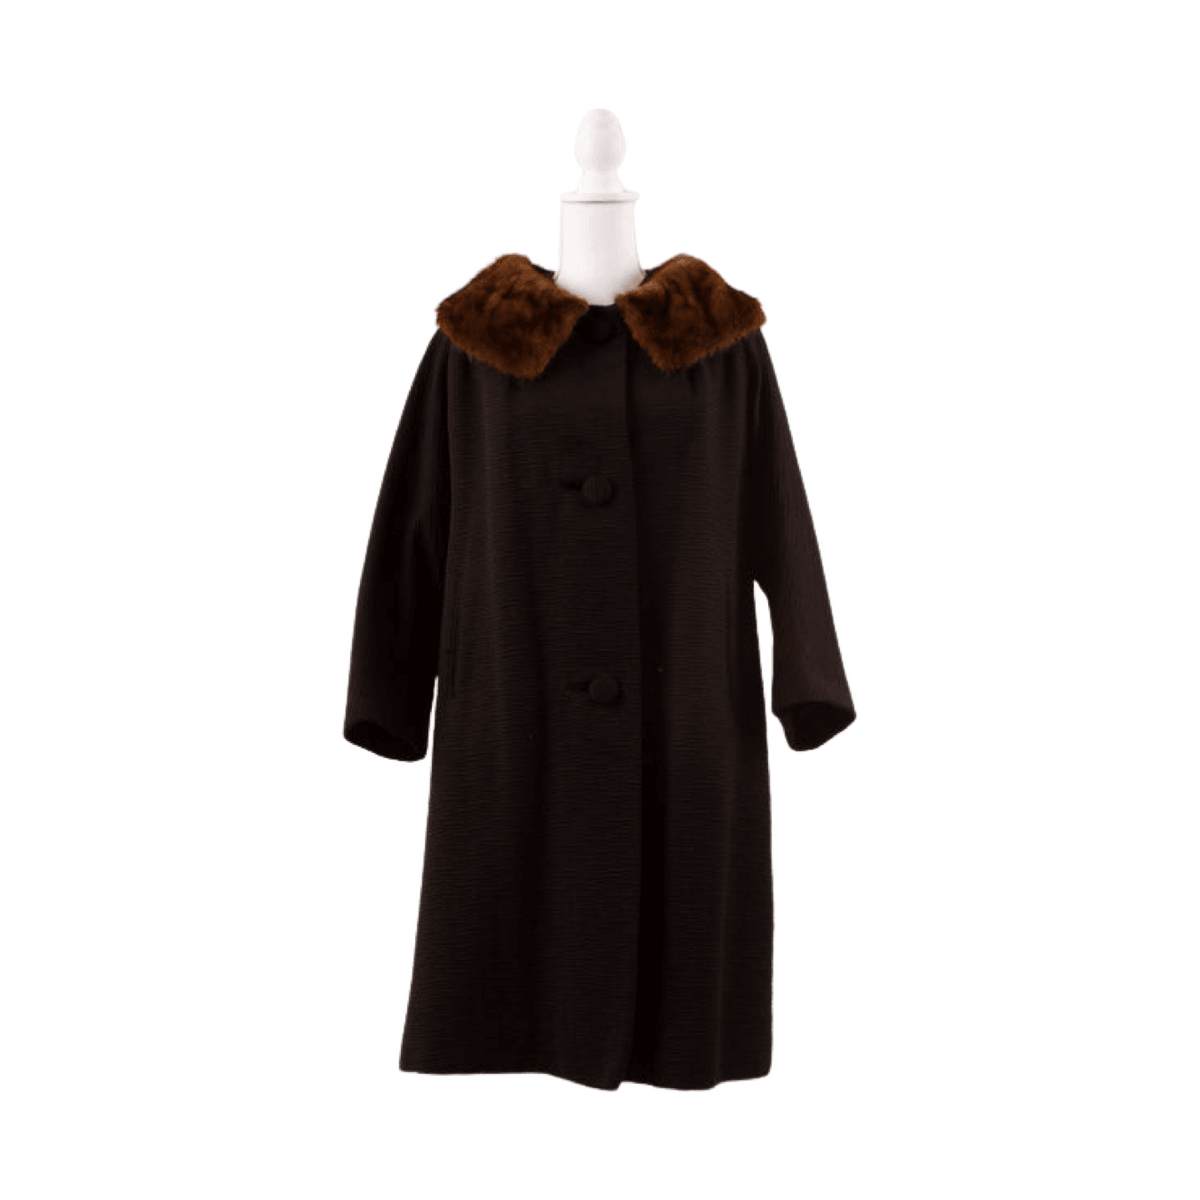 Pre-Owned MAISON DE COUTURE 50's Coat with Mink Collar | Size M/L - theREMODA